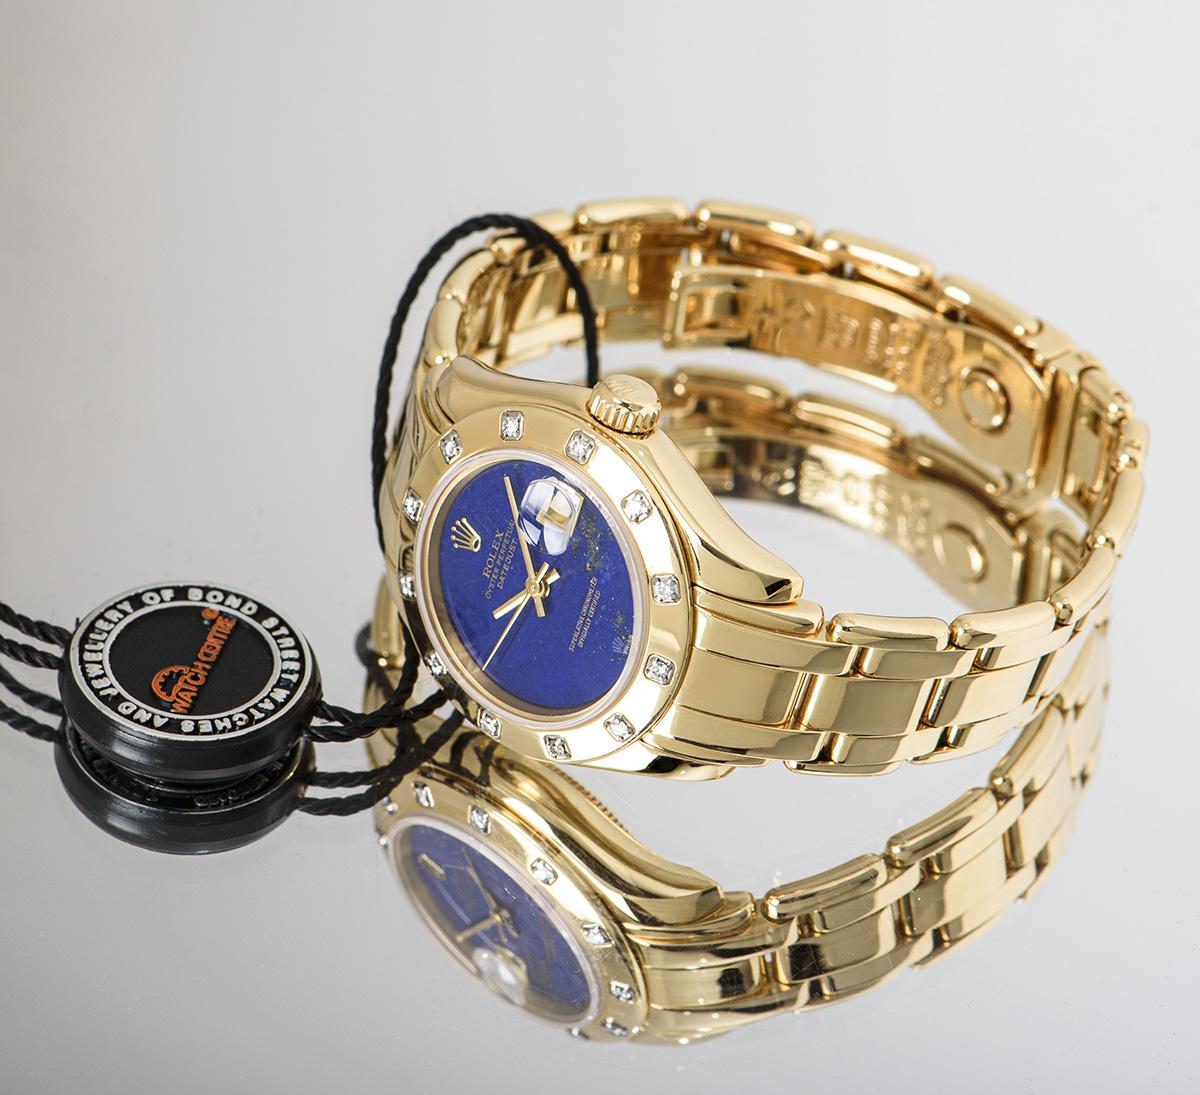 An 18k Yellow Gold Oyster Perpetual 29mm Pearlmaster Datejust Women's Wristwatch, rare lapis lazuli dial, date at 3 0'clock, a fixed 18k yellow gold bezel set with approximately 12 round brilliant cut diamonds, an 18k yellow gold pearlmaster